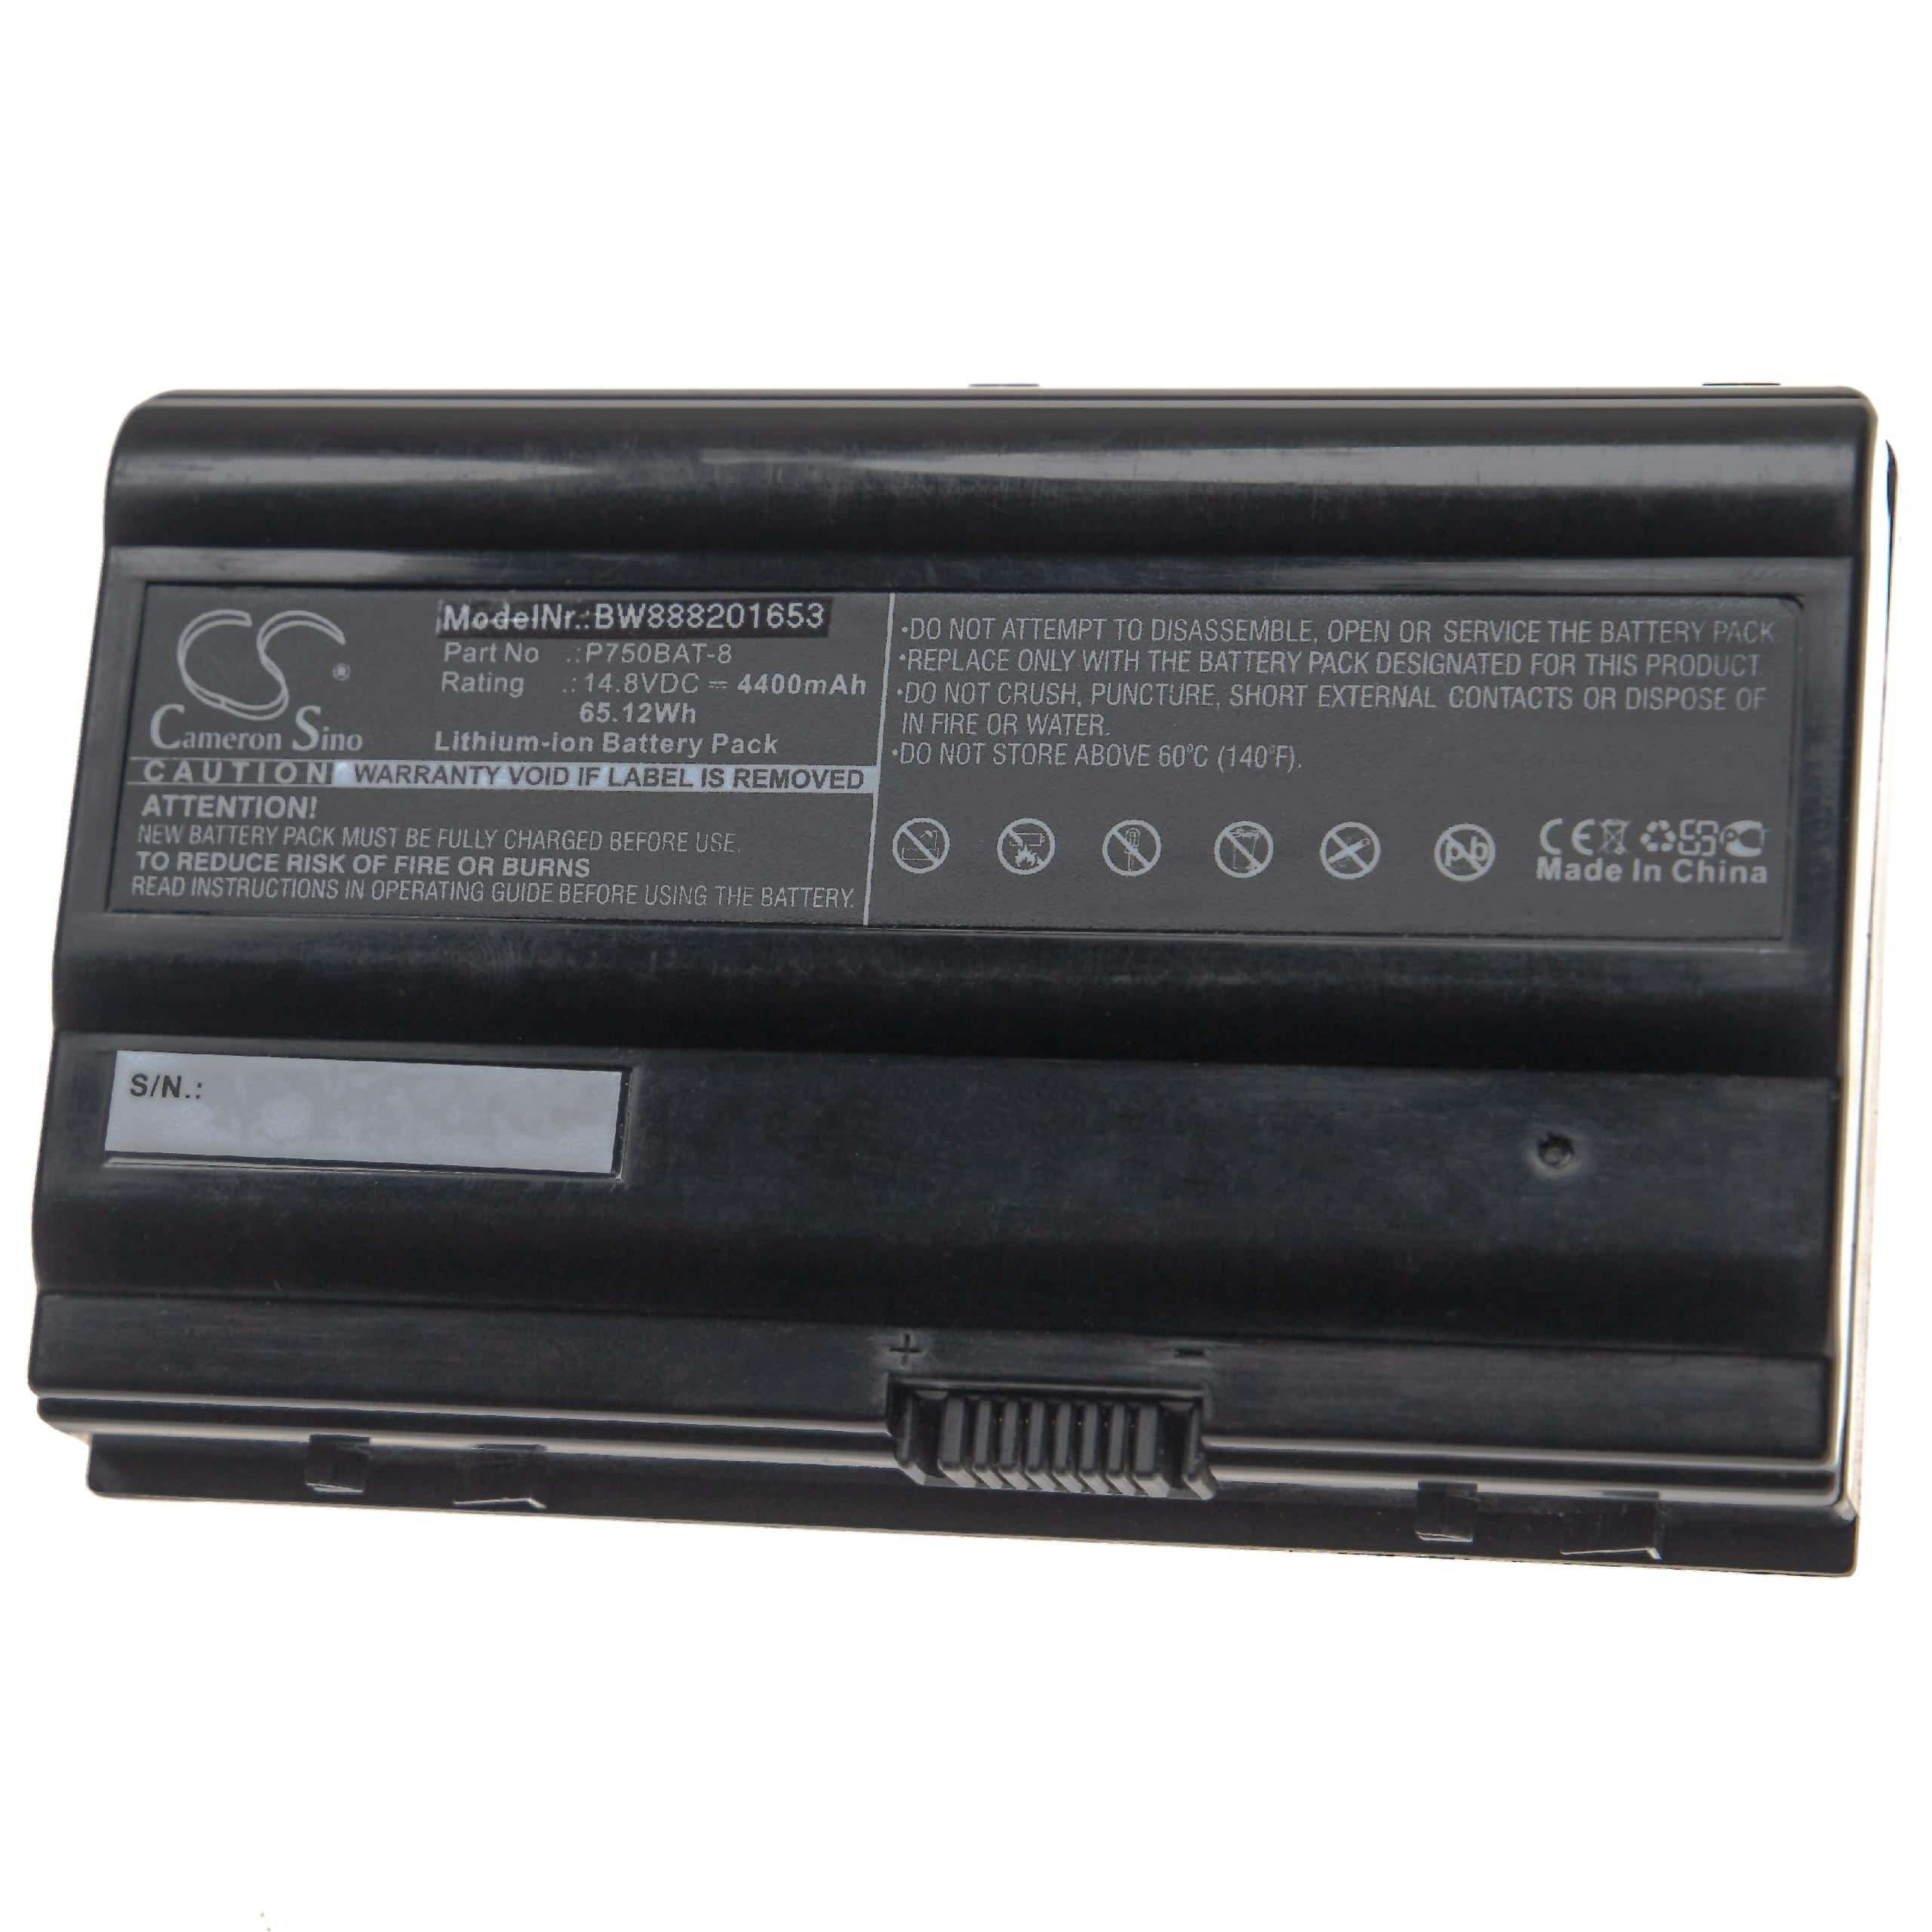 Notebook Battery Replacement for 6-87-P750S-4272, 6-87-P750S-4U73, 4ICR18/65-2 - 4400mAh 14.8V Li-Ion, black